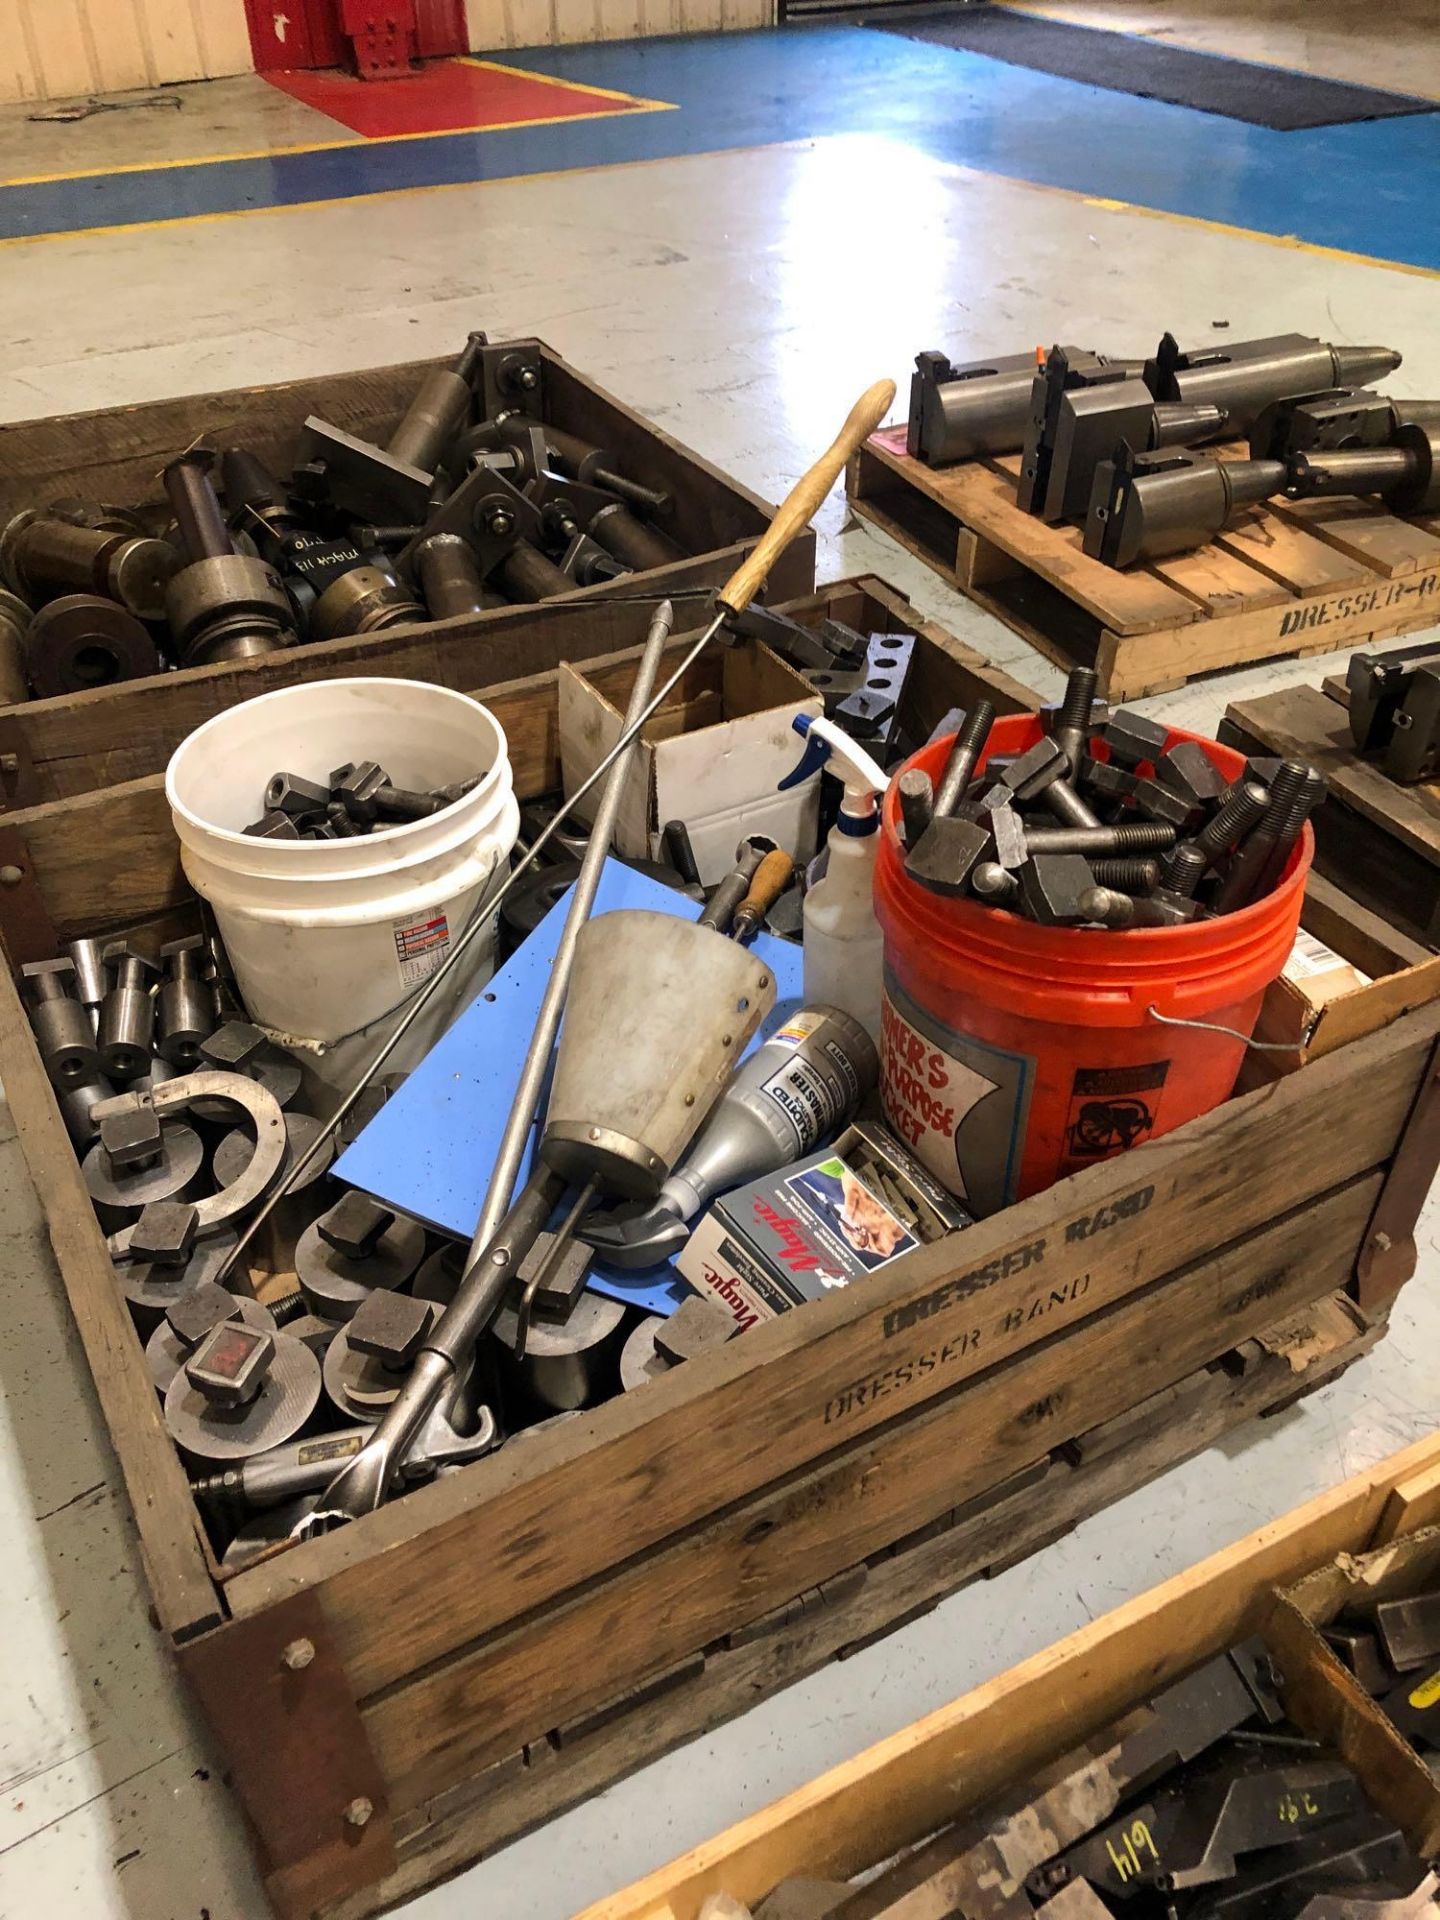 Lot of Misc Hold downs & Set-up Tooling for VTL in Wood Box / Crate - Image 2 of 6